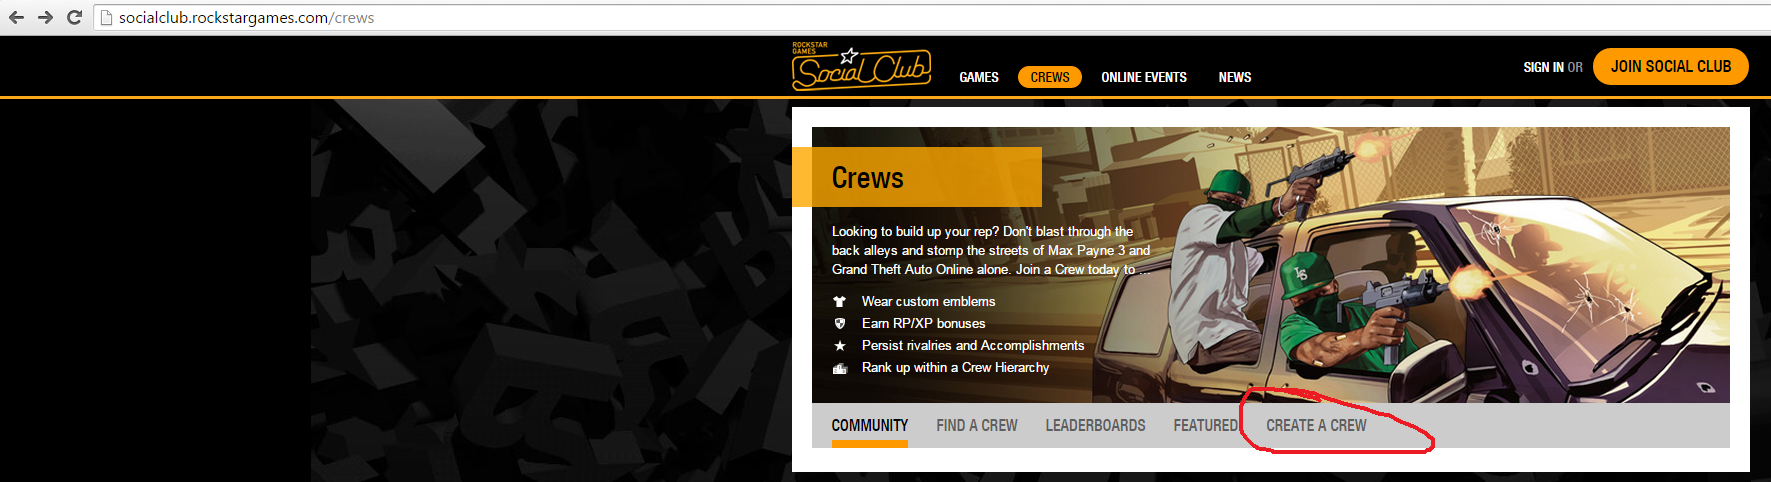 How to Create an Account on Rockstar Games Social Club Using your